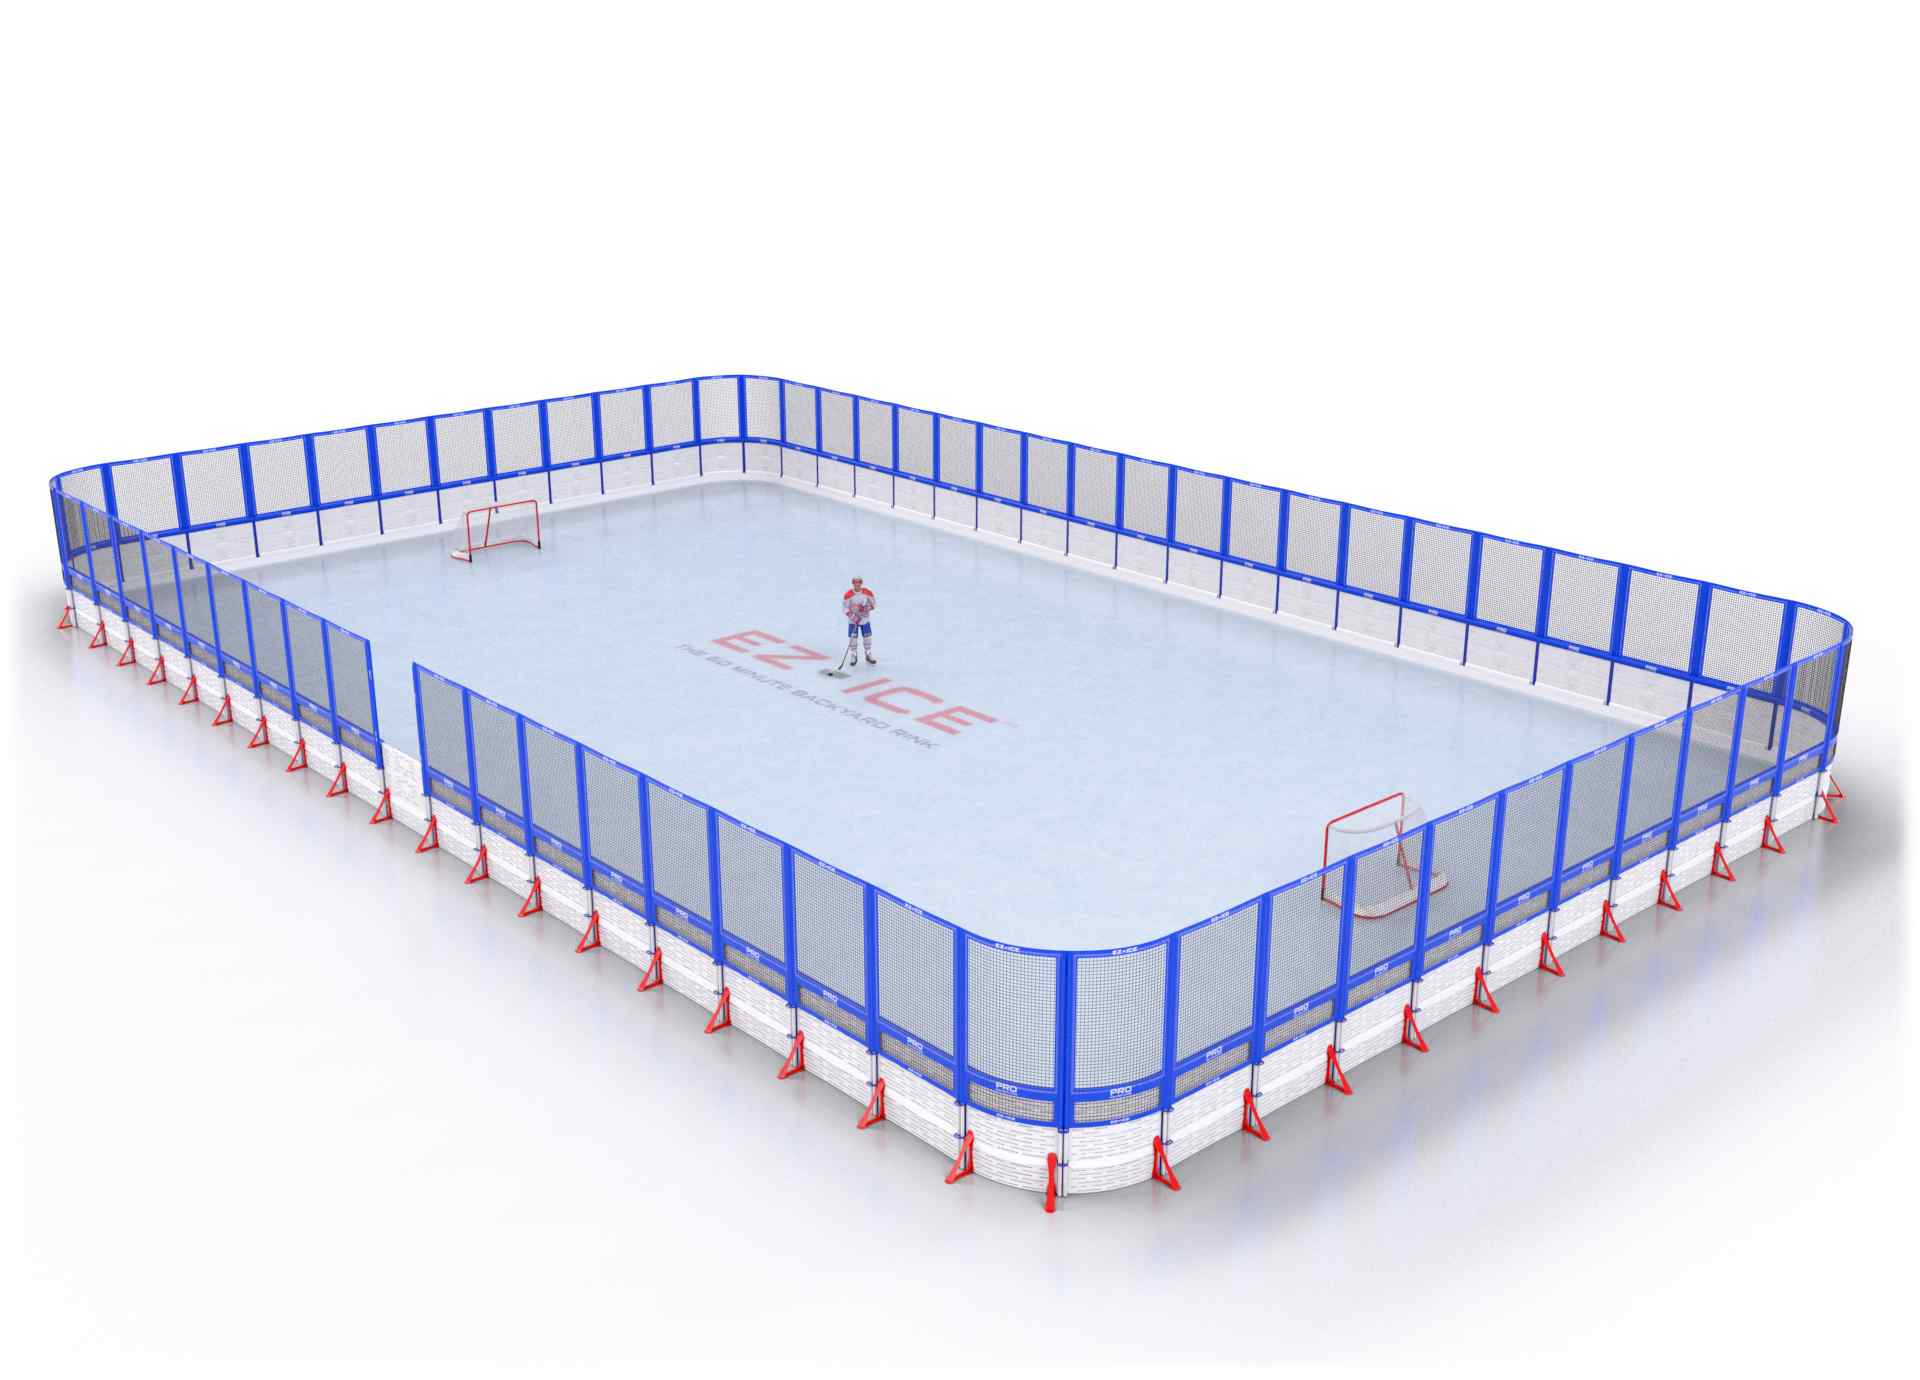 EZ ICE PRO Home Arena System ™ – New Rink: [PRO // 60ft * 100ft //  Net-Net-Net // Round Corners // With Bumpers] - 060100NNNRBX